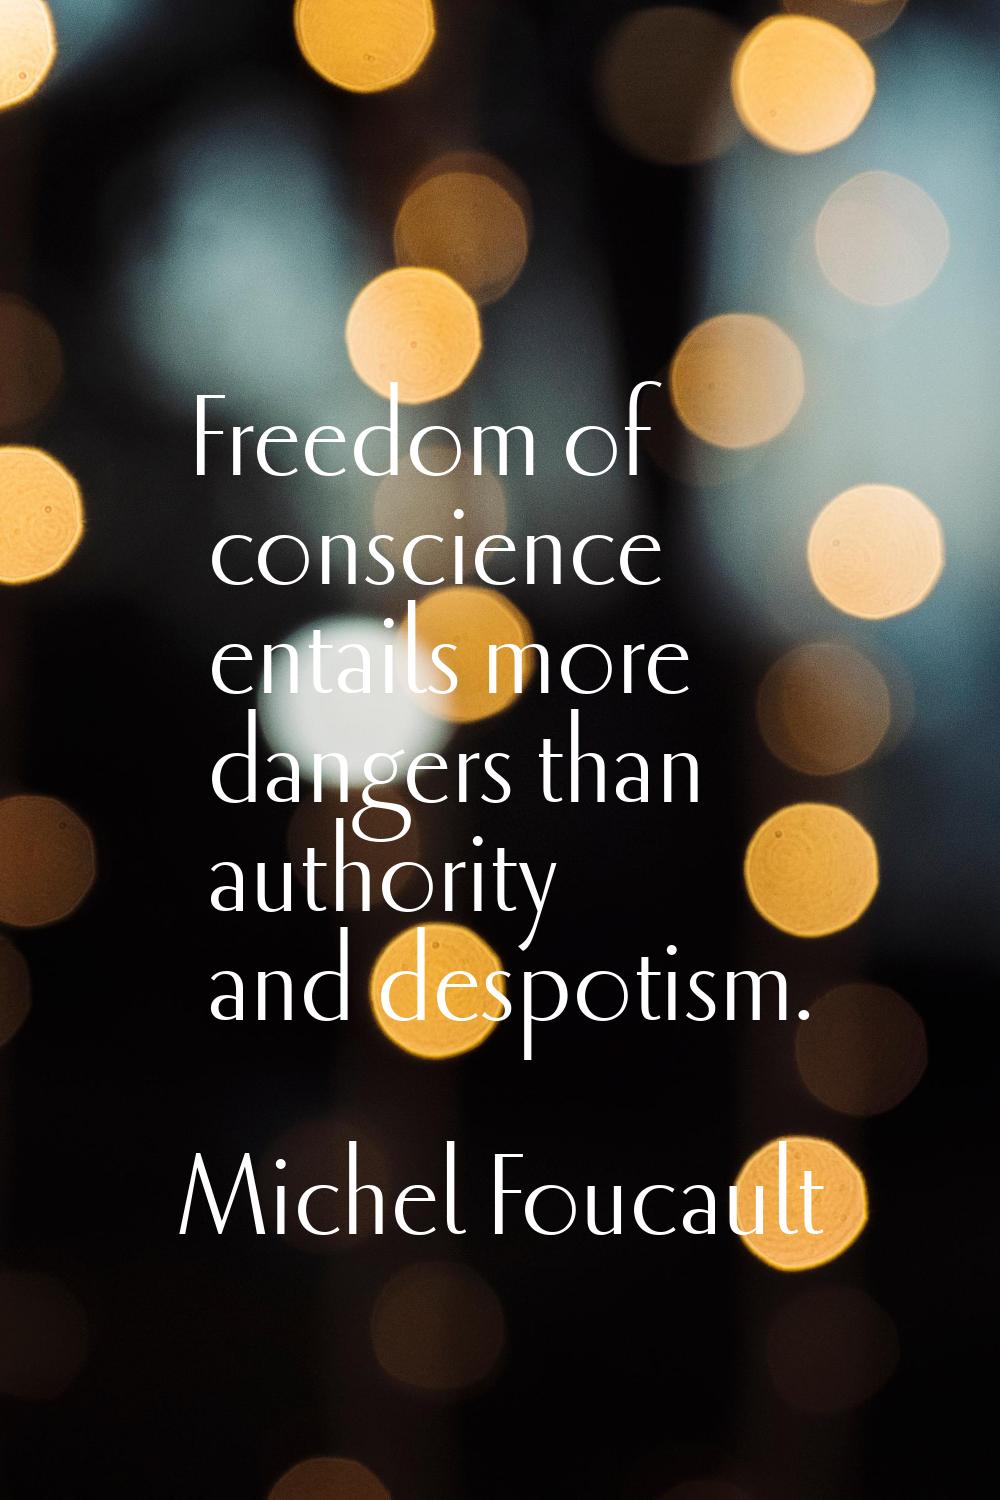 Freedom of conscience entails more dangers than authority and despotism.